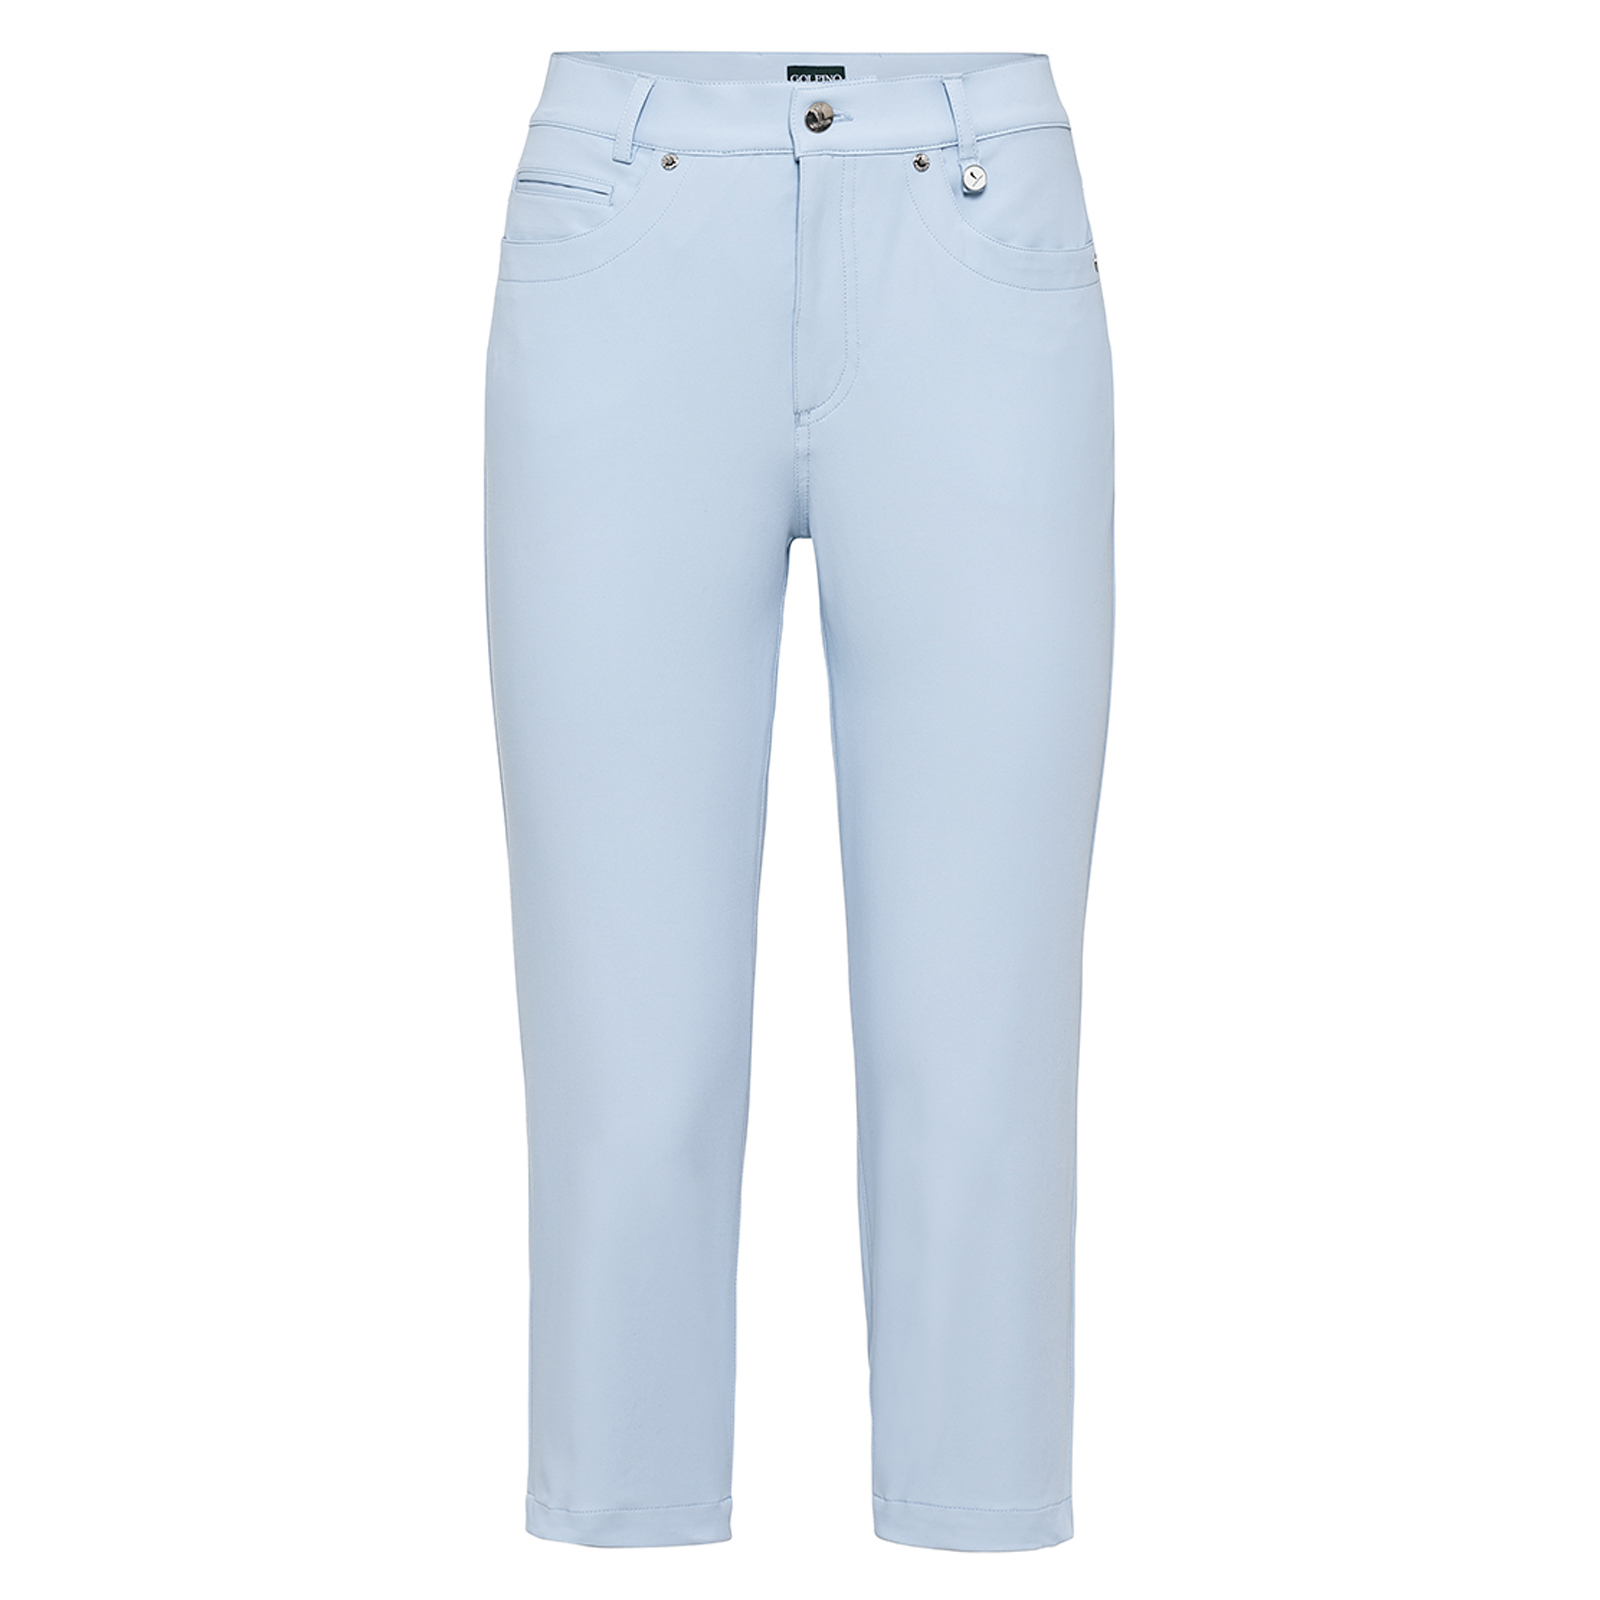 Ladies' capri trousers with stretch function 